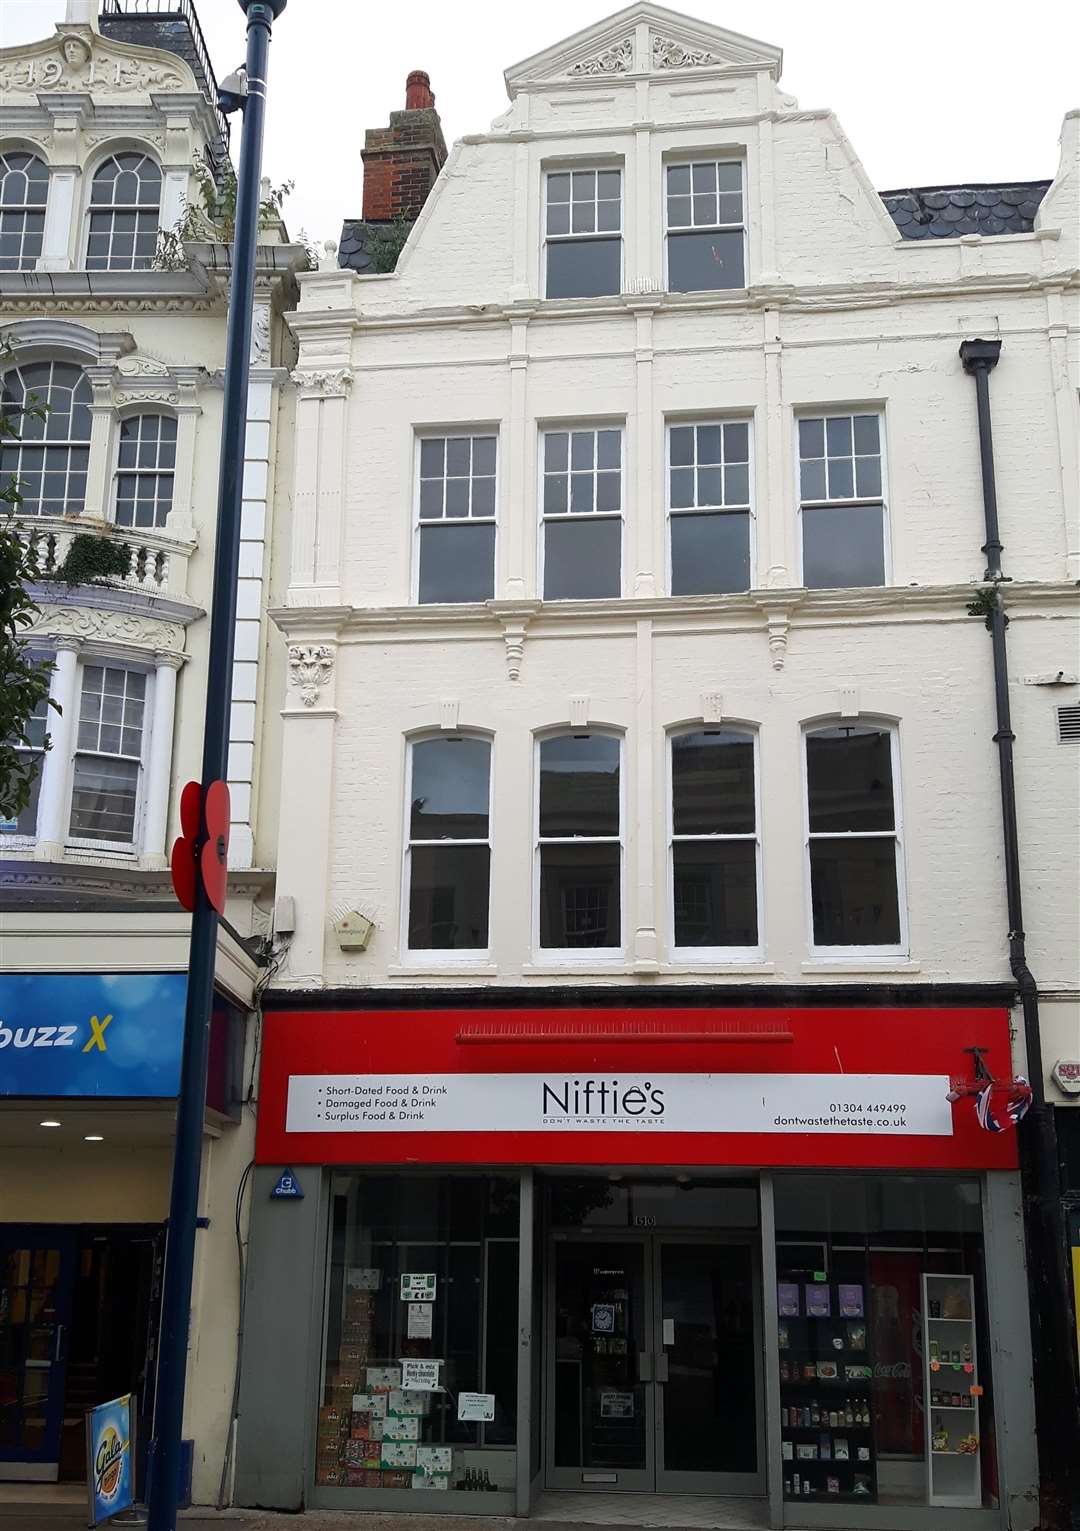 Looking better. One empty building has been spruced up and its shop front re-occupied, by Niftie's